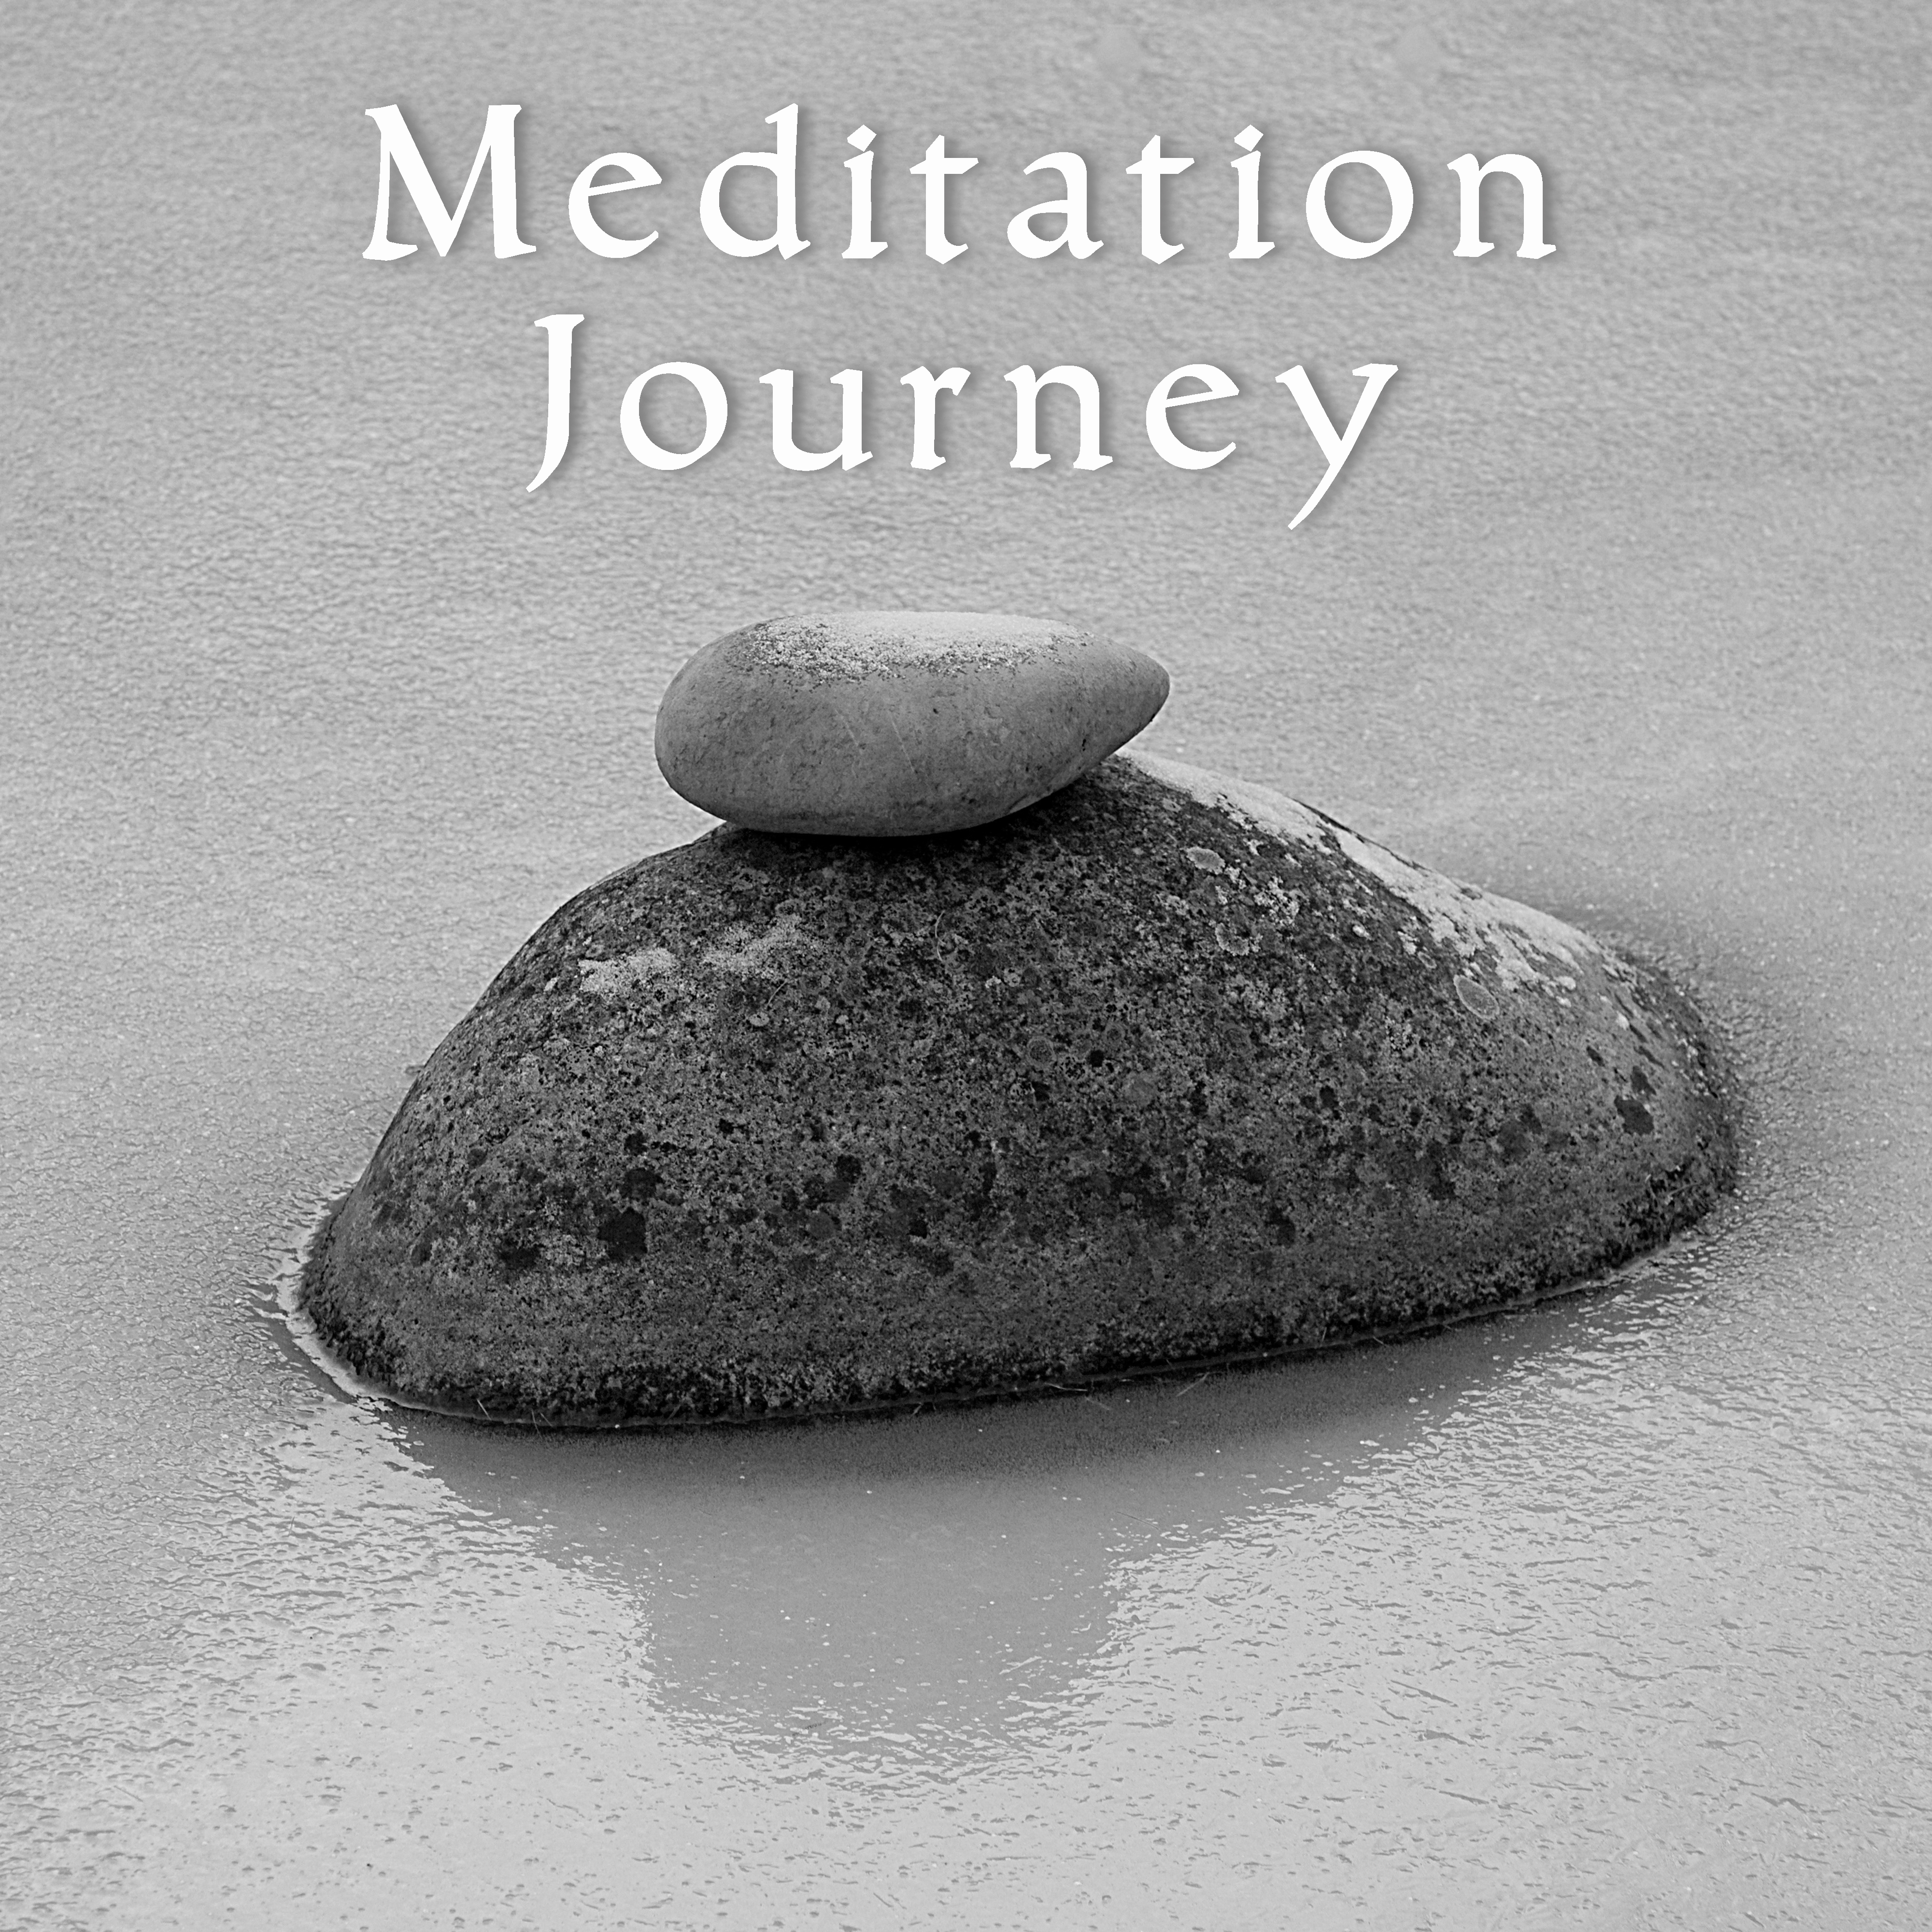 Meditation Journey  Yoga Music, Feel Deep Relaxation with New Age 2017, Spiritual Melodies, Zen Power